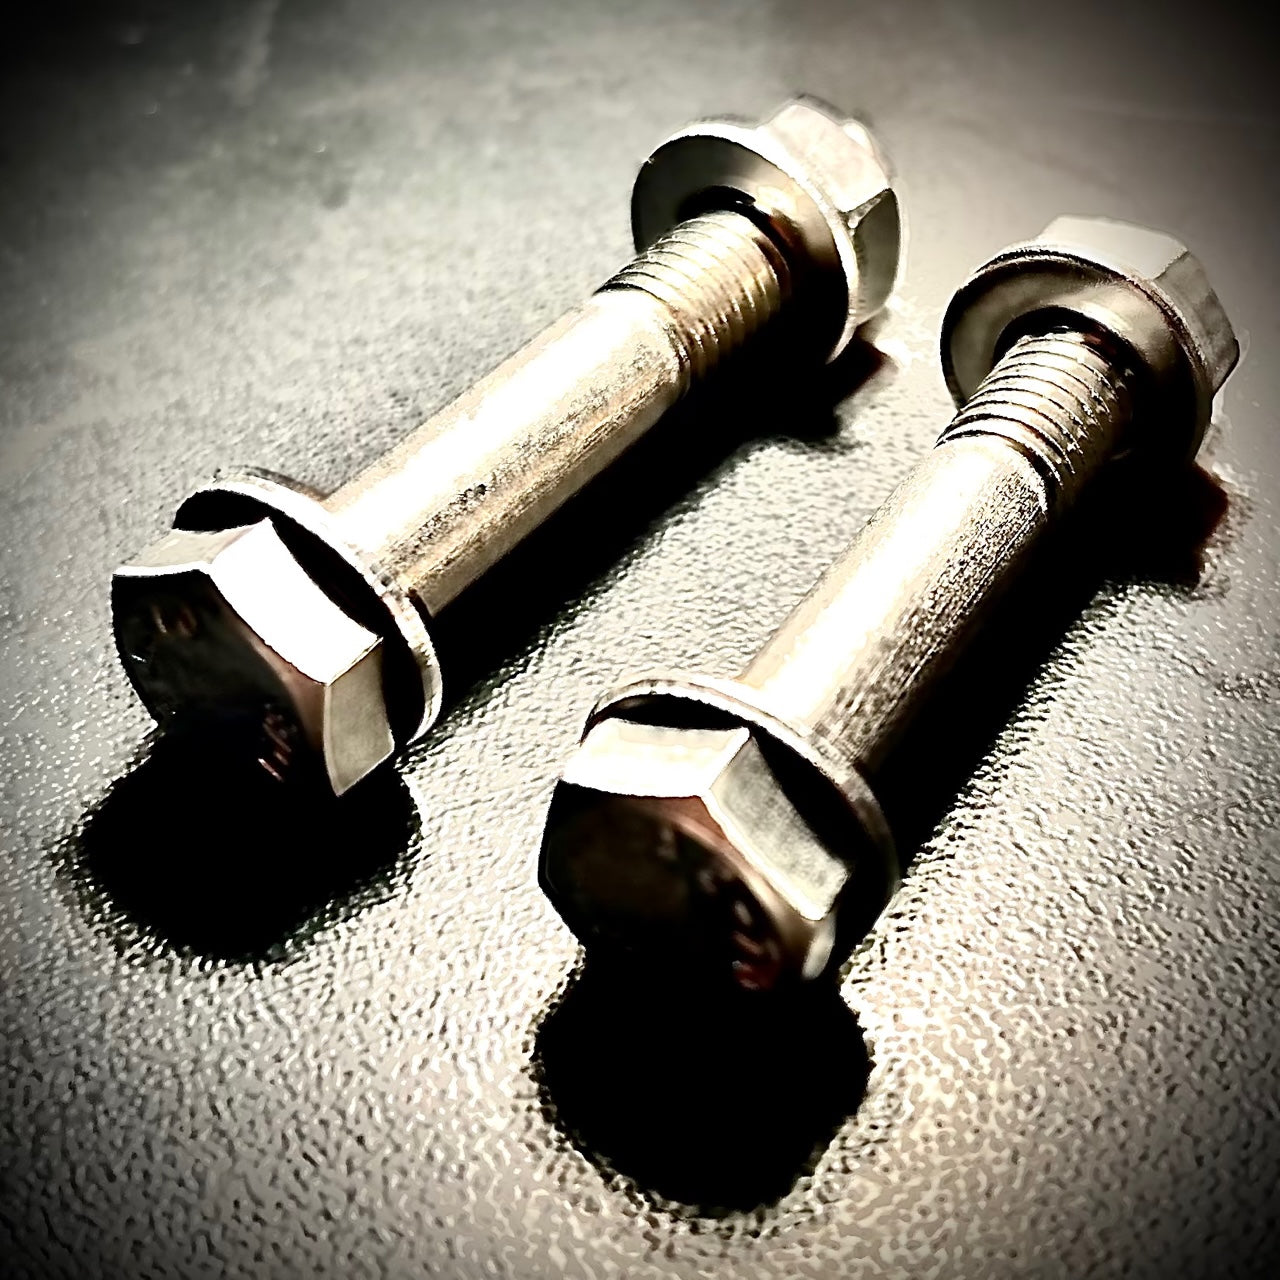 M8 x Under 95mm Hex Bolt plus Nut and Washers A2/ 304 Stainless Steel DIN 931 - Fixaball Ltd. Fixings and Fasteners UK